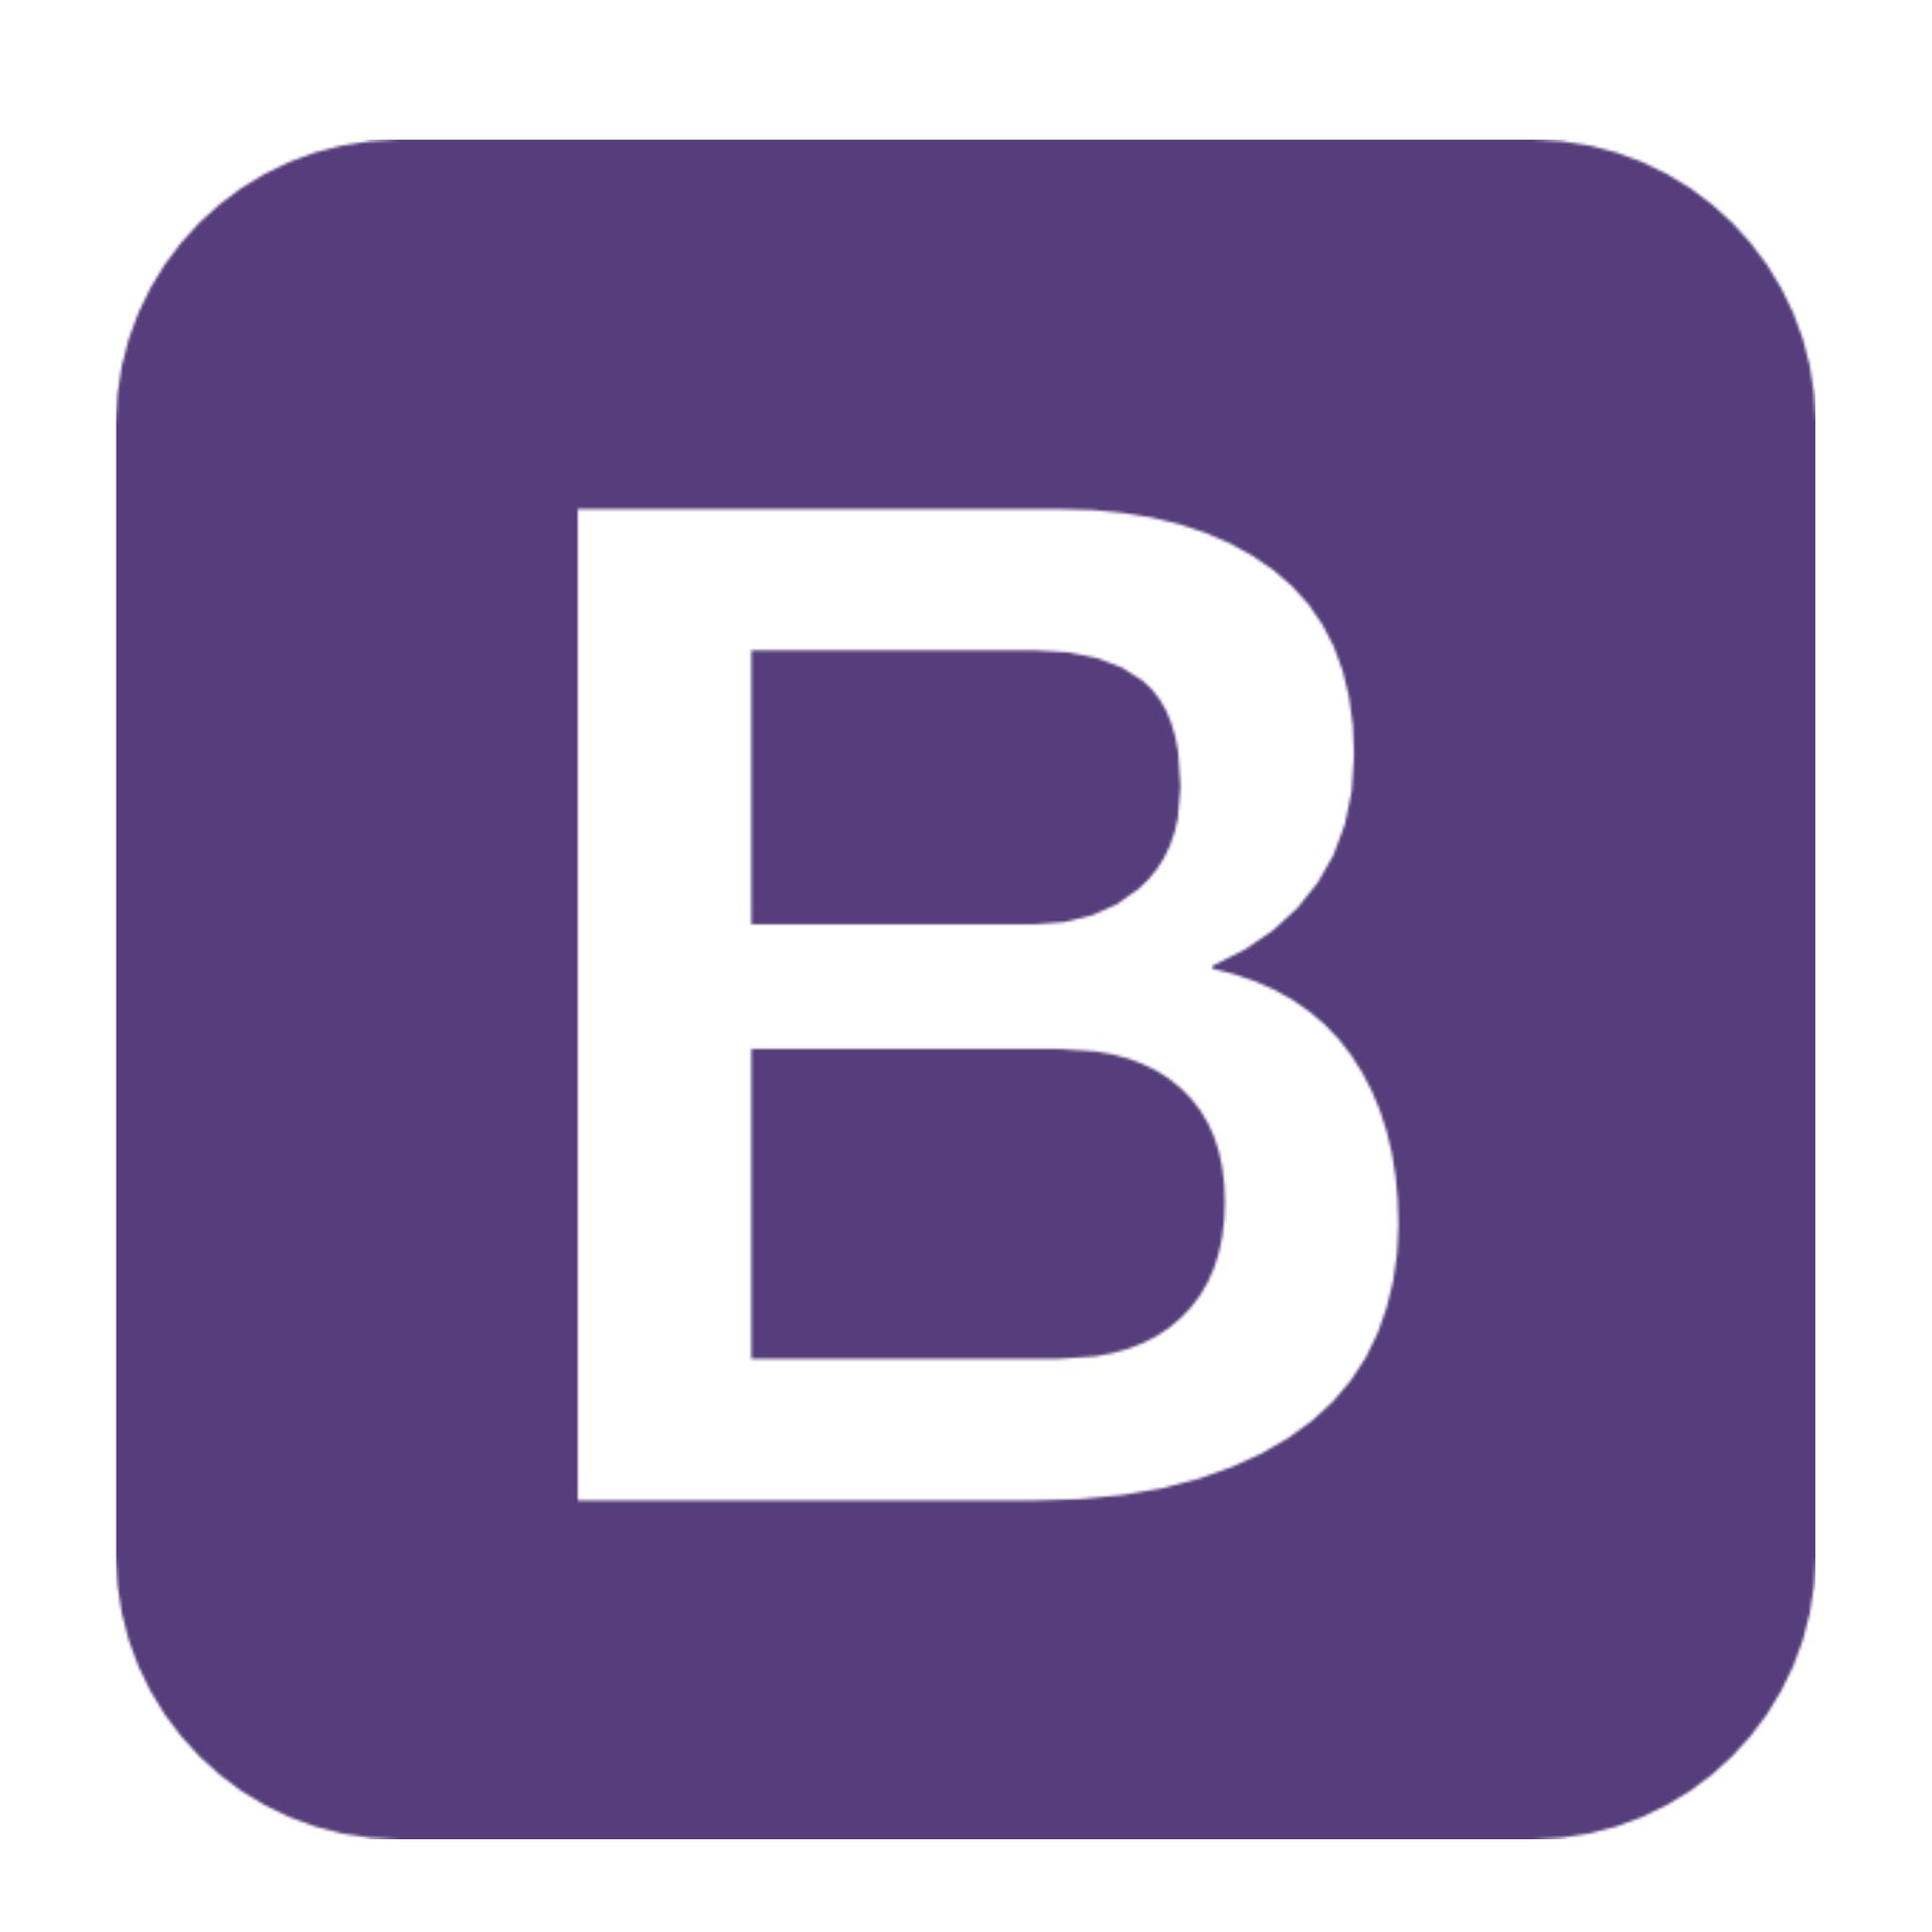 Bootstrap Image